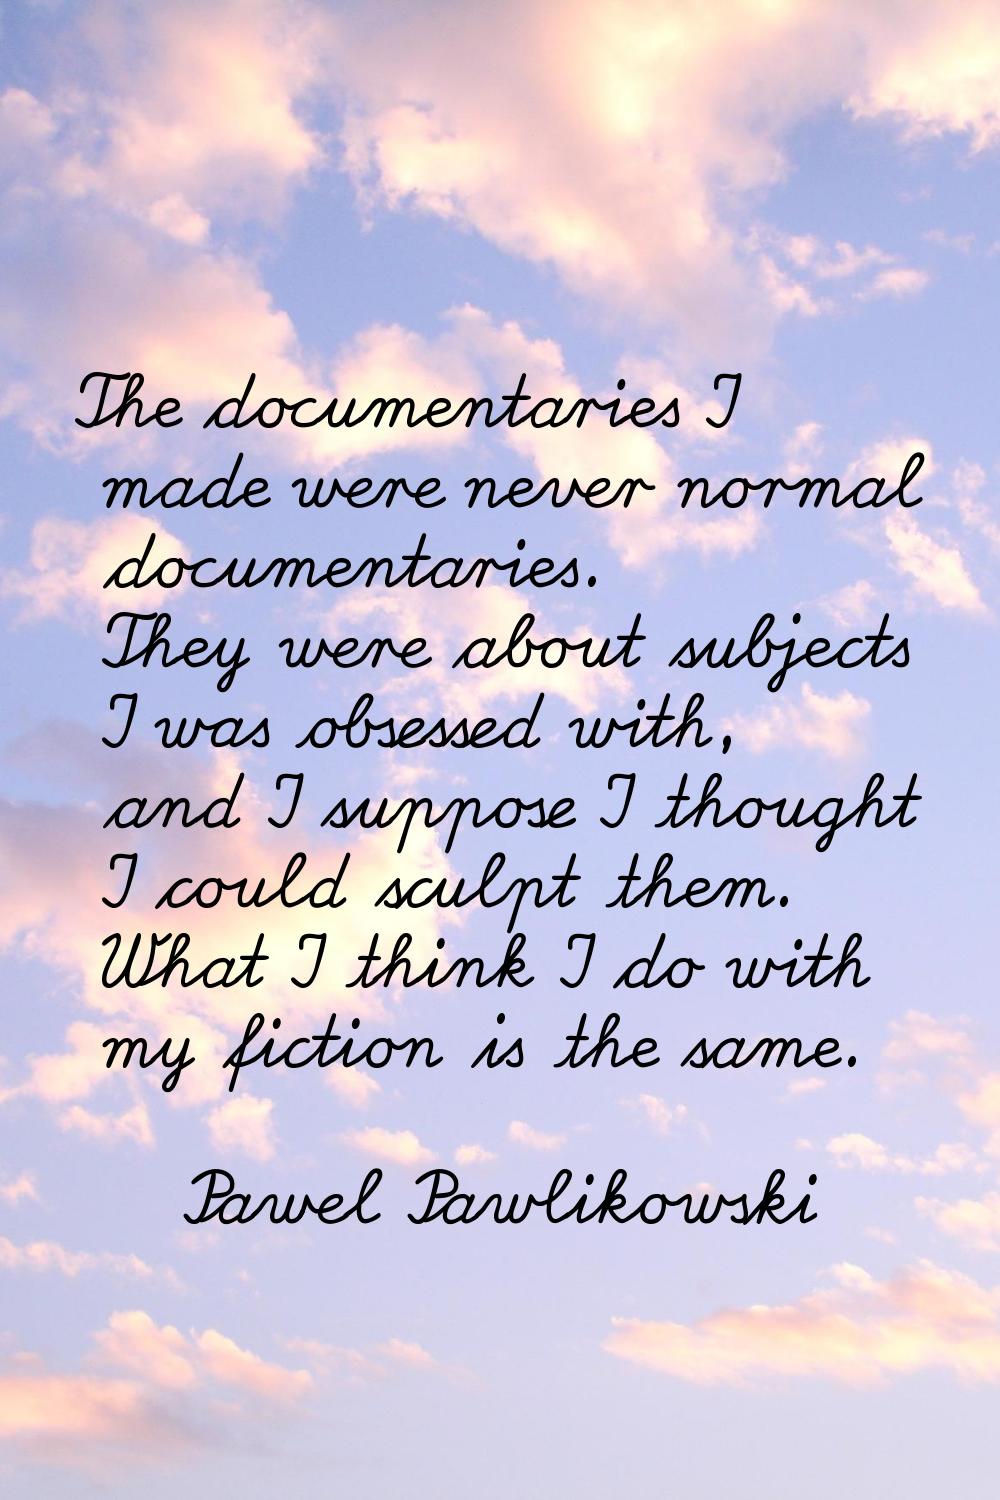 The documentaries I made were never normal documentaries. They were about subjects I was obsessed w